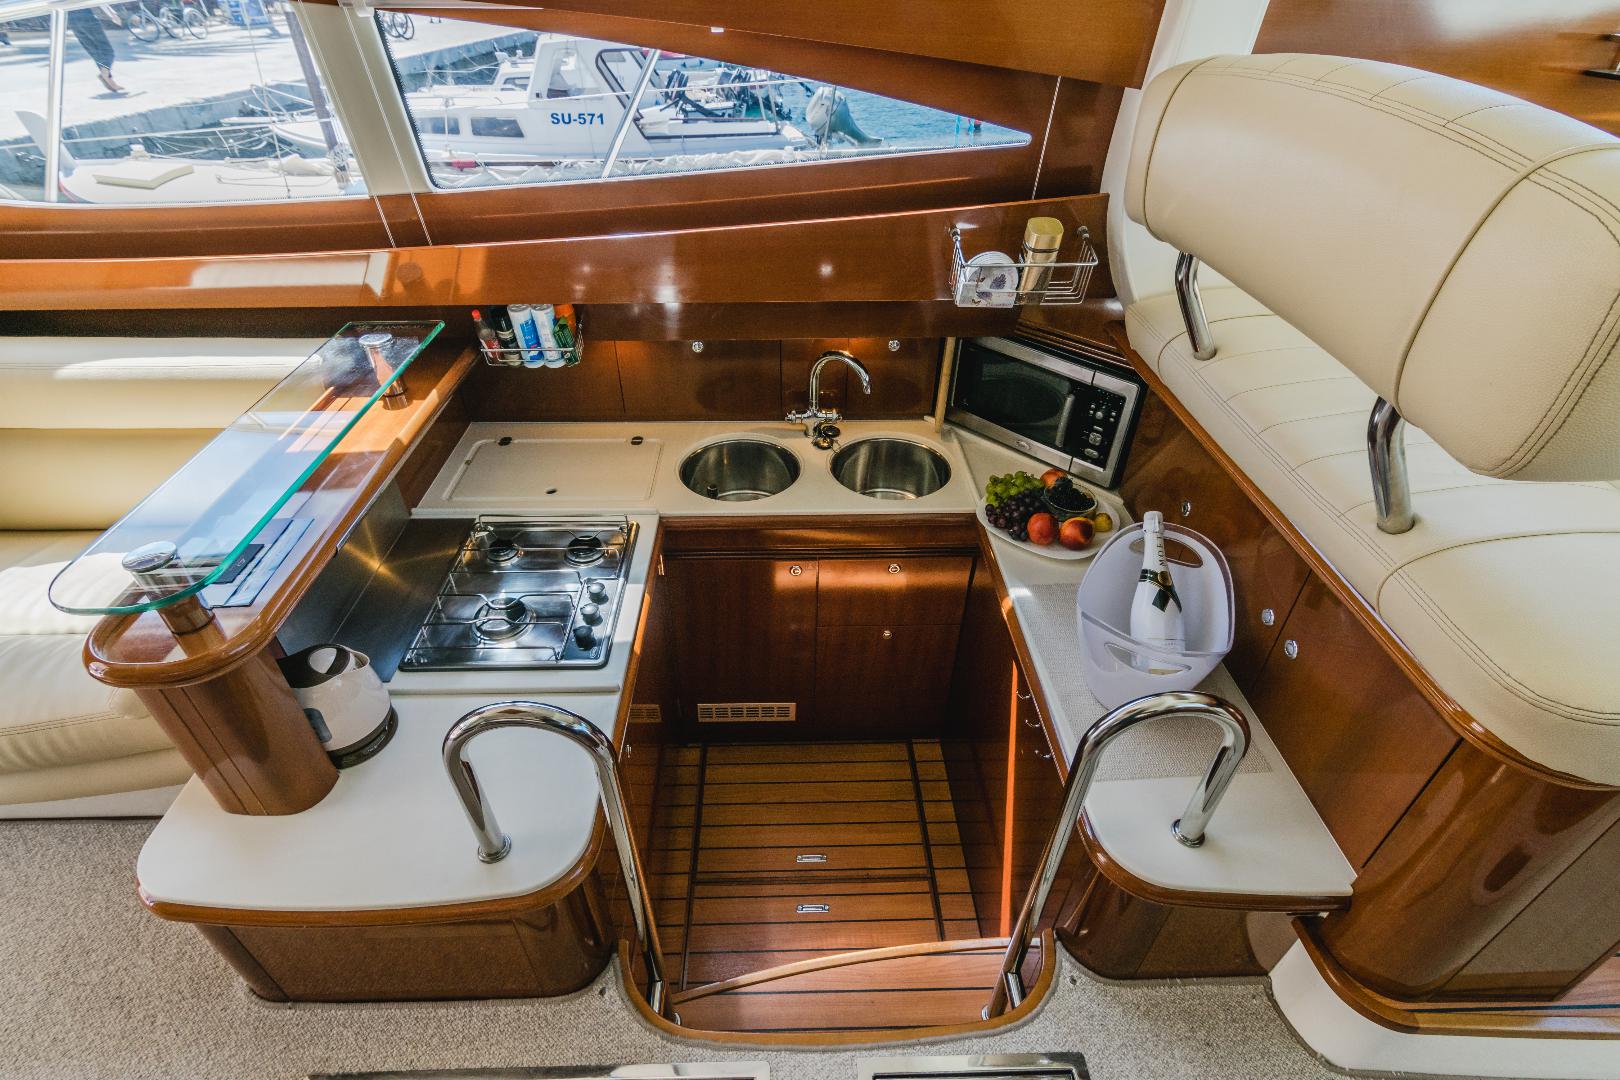 Jeanneau_Prestige_46_Fly_interior_commodore_yachting (2)